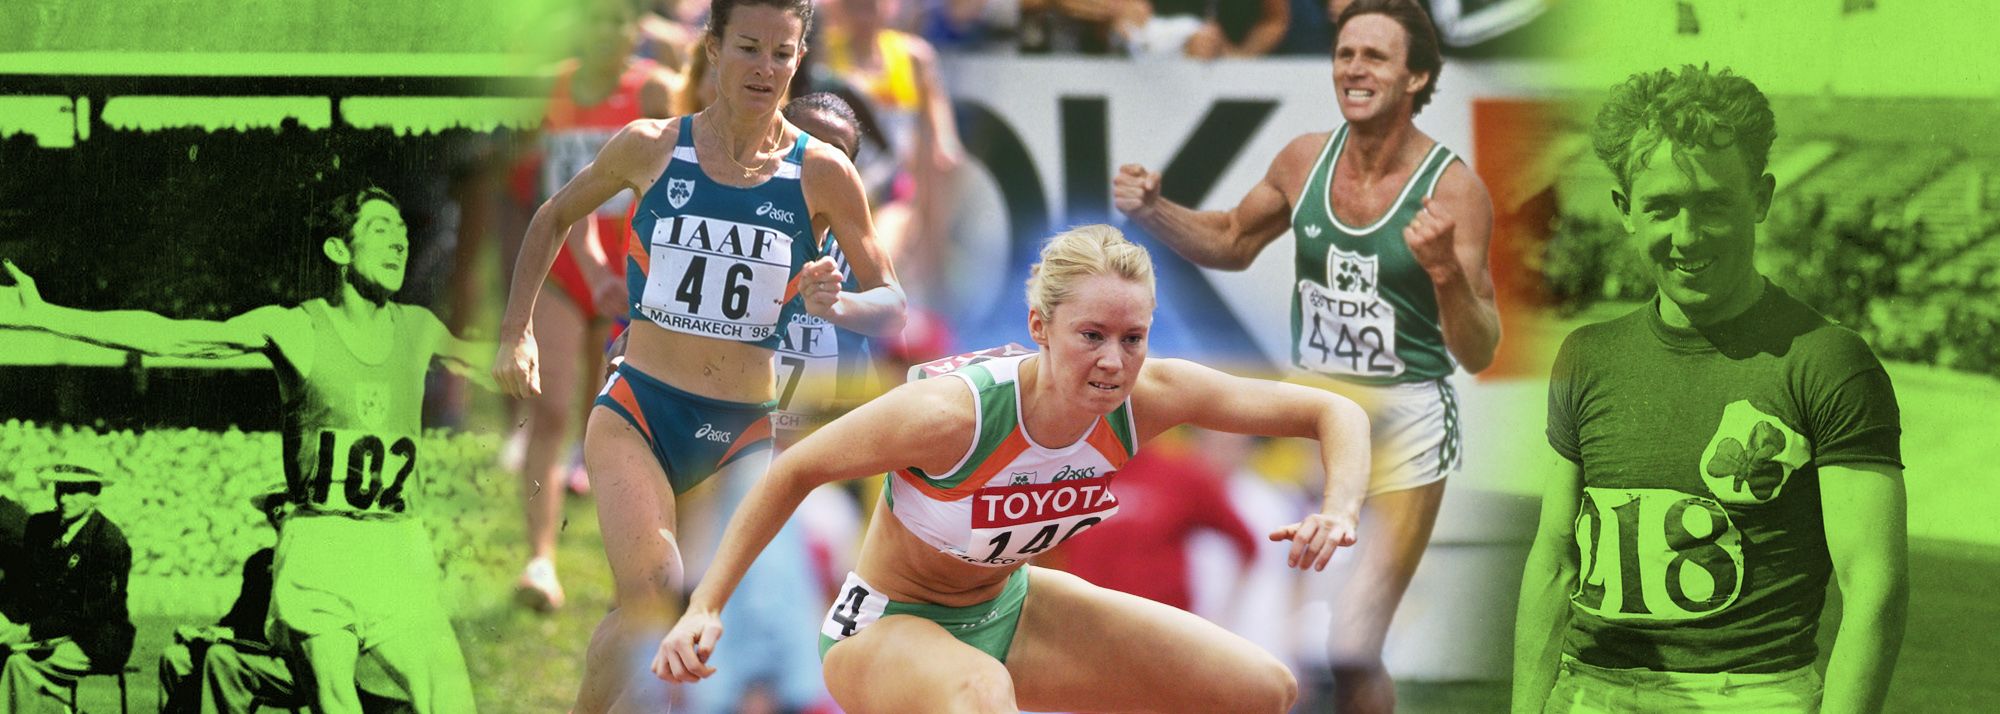 Looking back on the past 150 years of athletics in Ireland